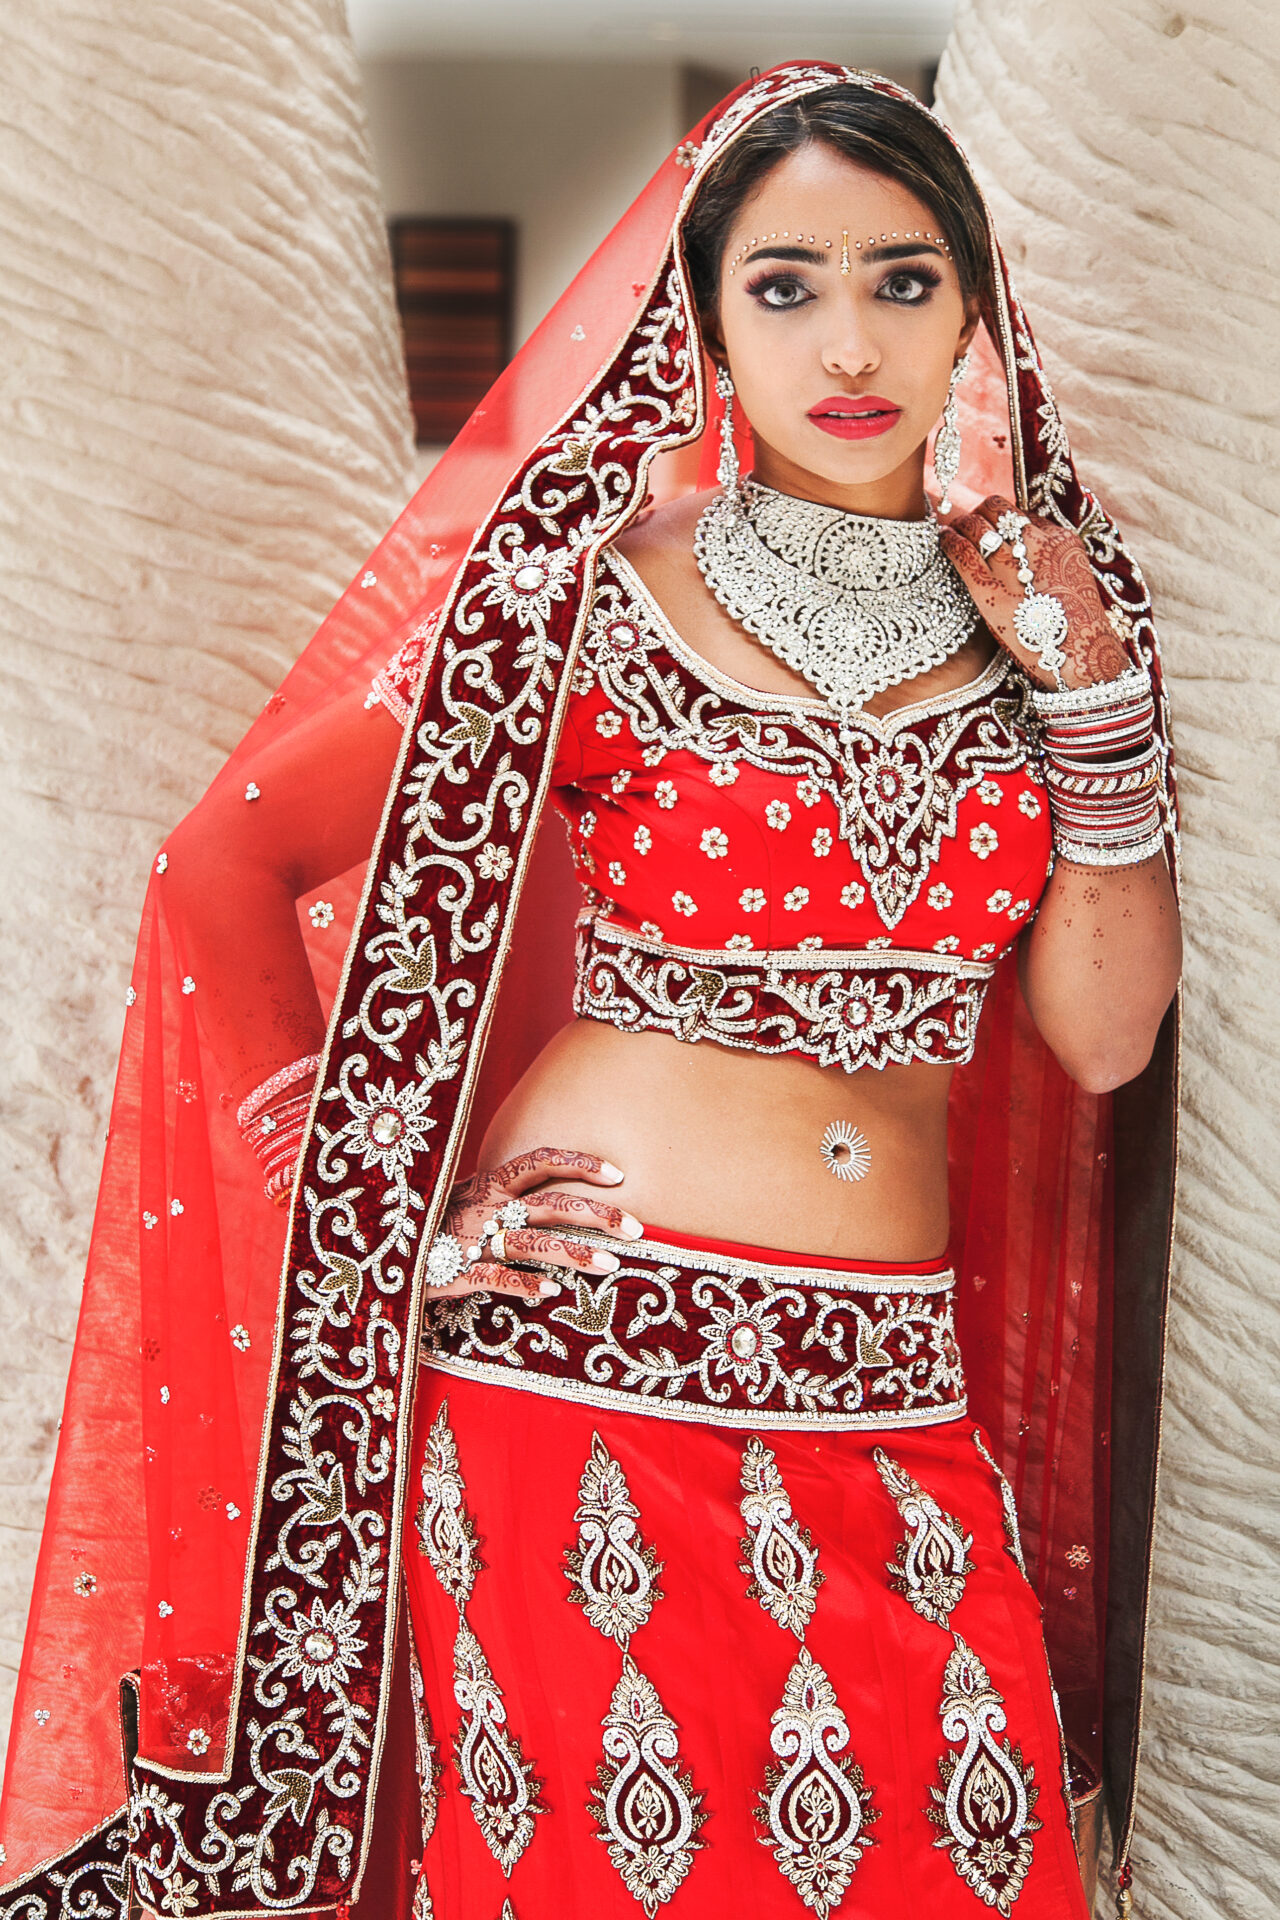 South Asian Wedding photo of a happy bride by Astrapia Photography